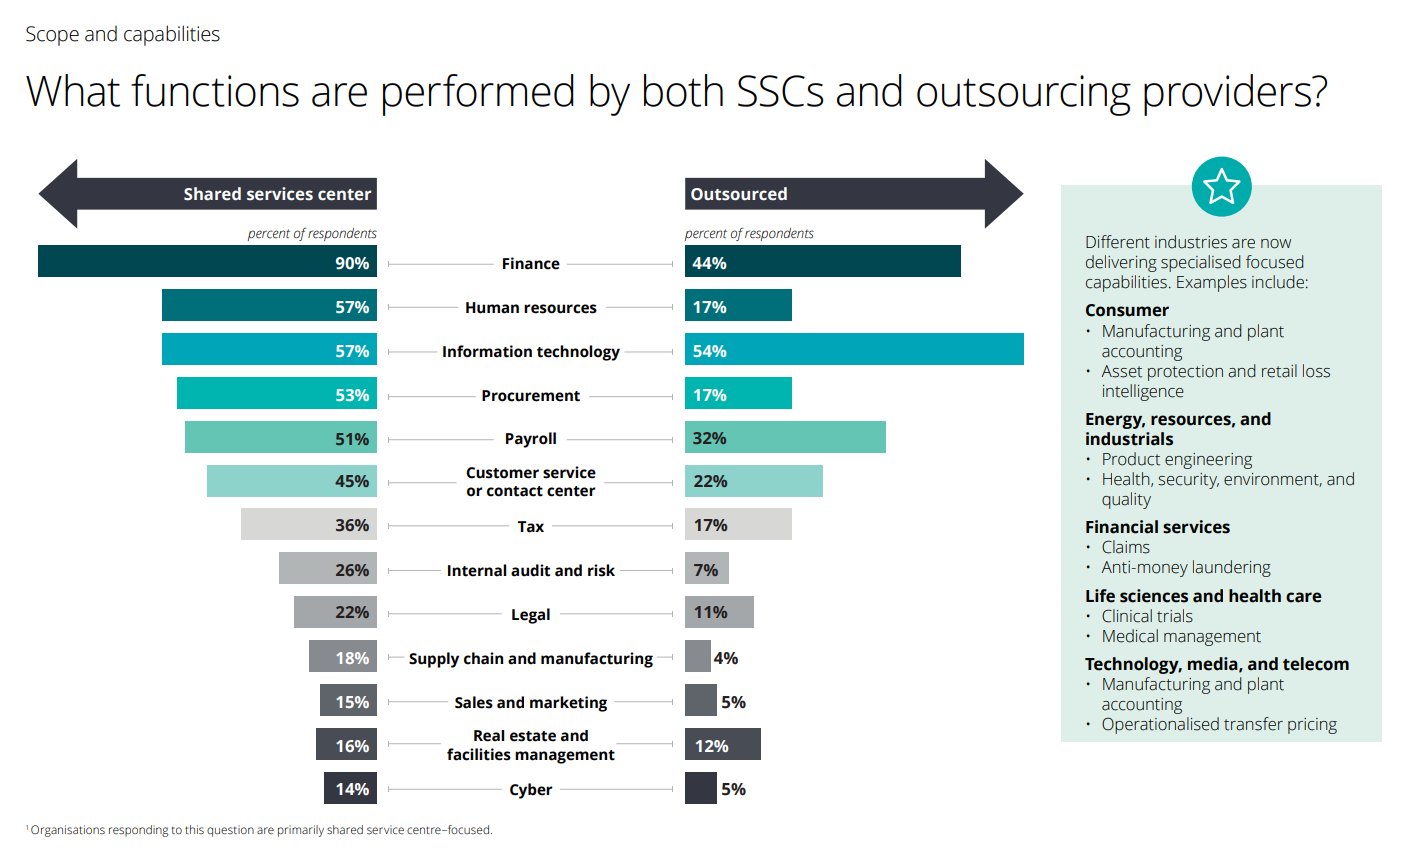 What functions are performed by both SSCs and outsourcing providers?